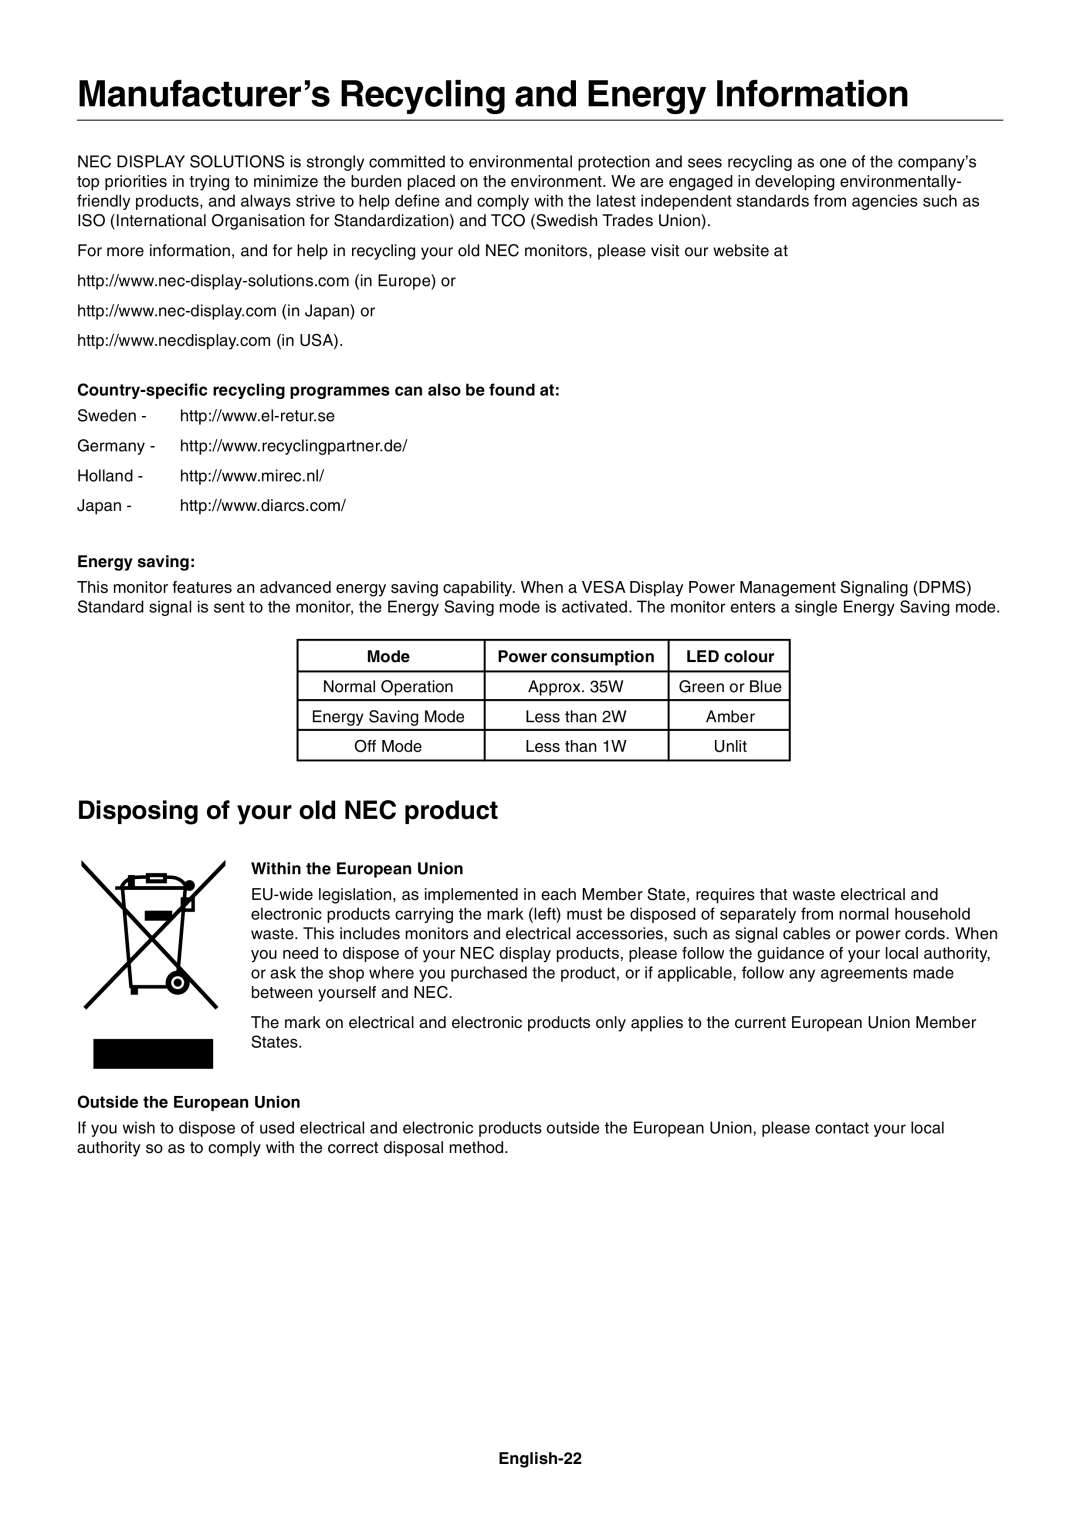 NEC LCD1990FXp user manual Manufacturer’s Recycling and Energy Information, Disposing of your old NEC product 